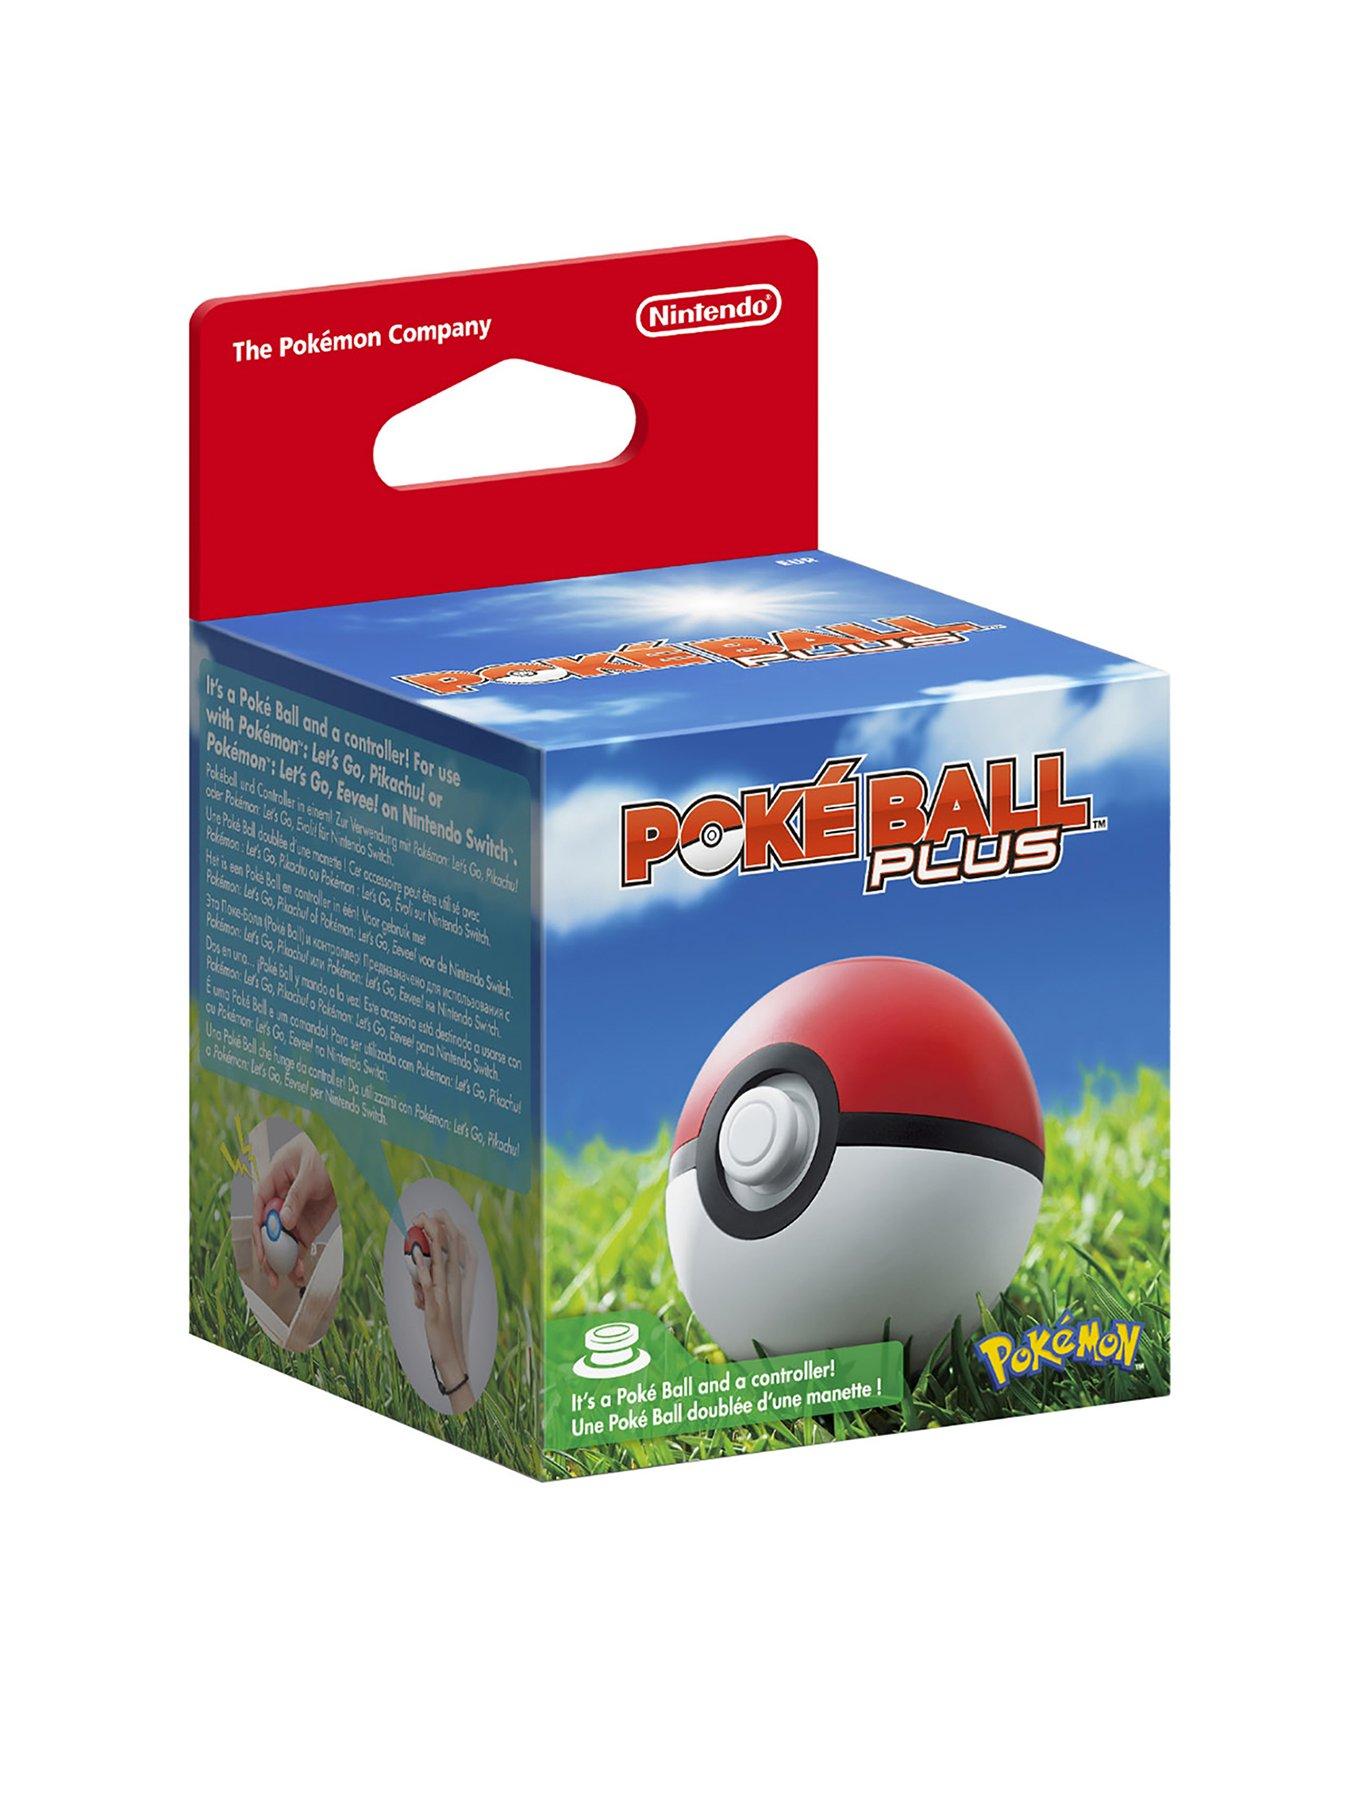 can you use pokeball plus on switch lite